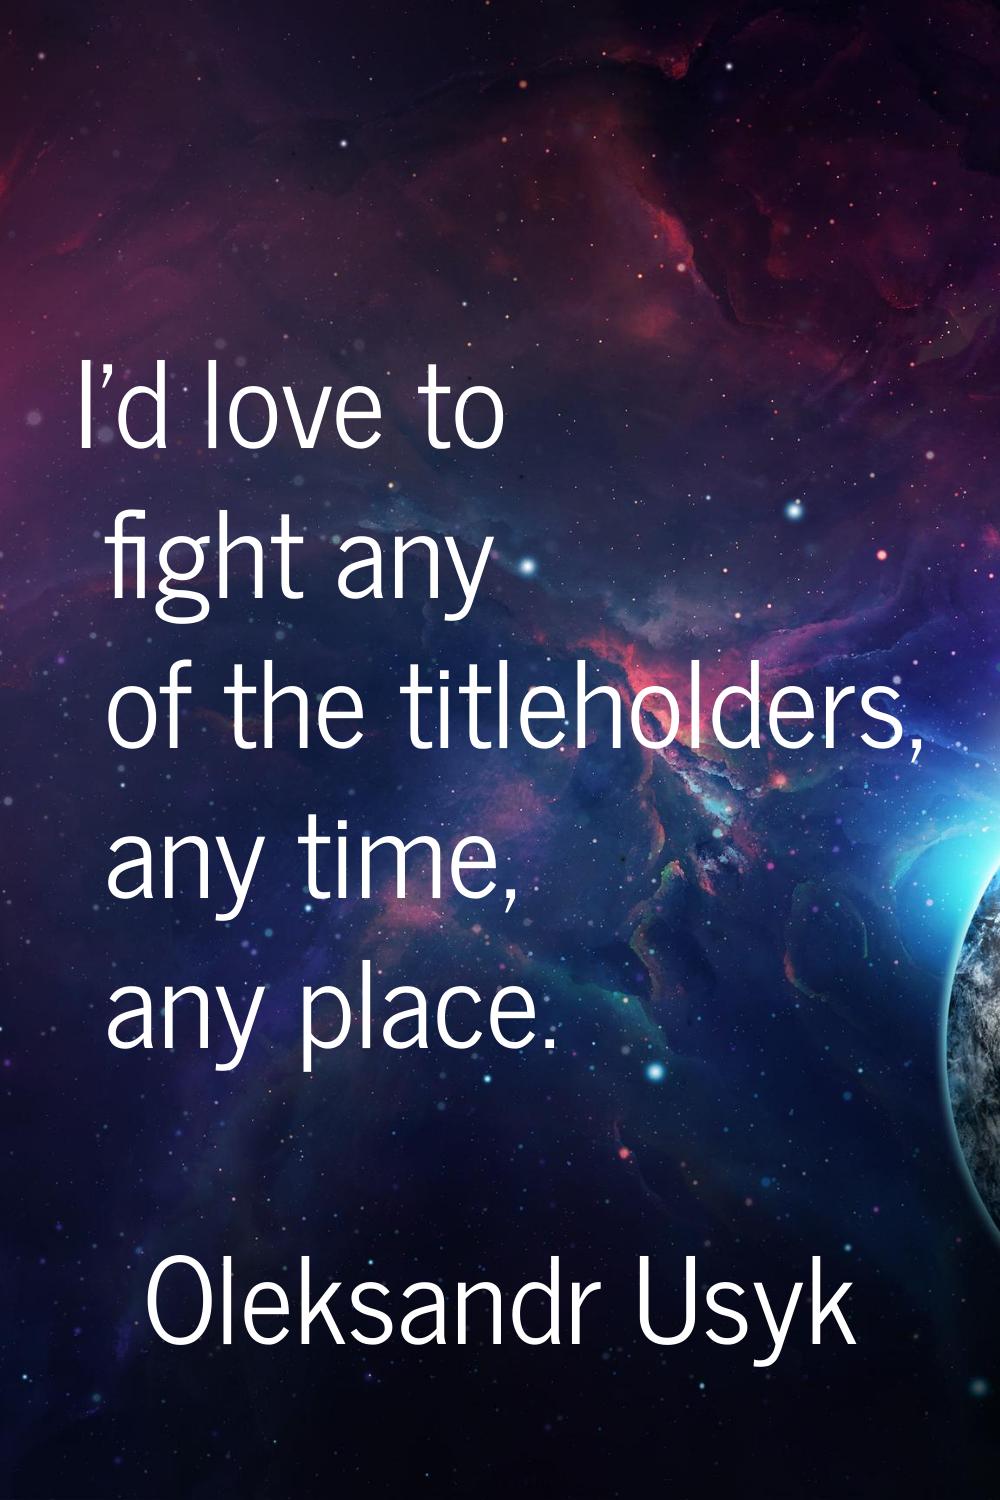 I'd love to fight any of the titleholders, any time, any place.